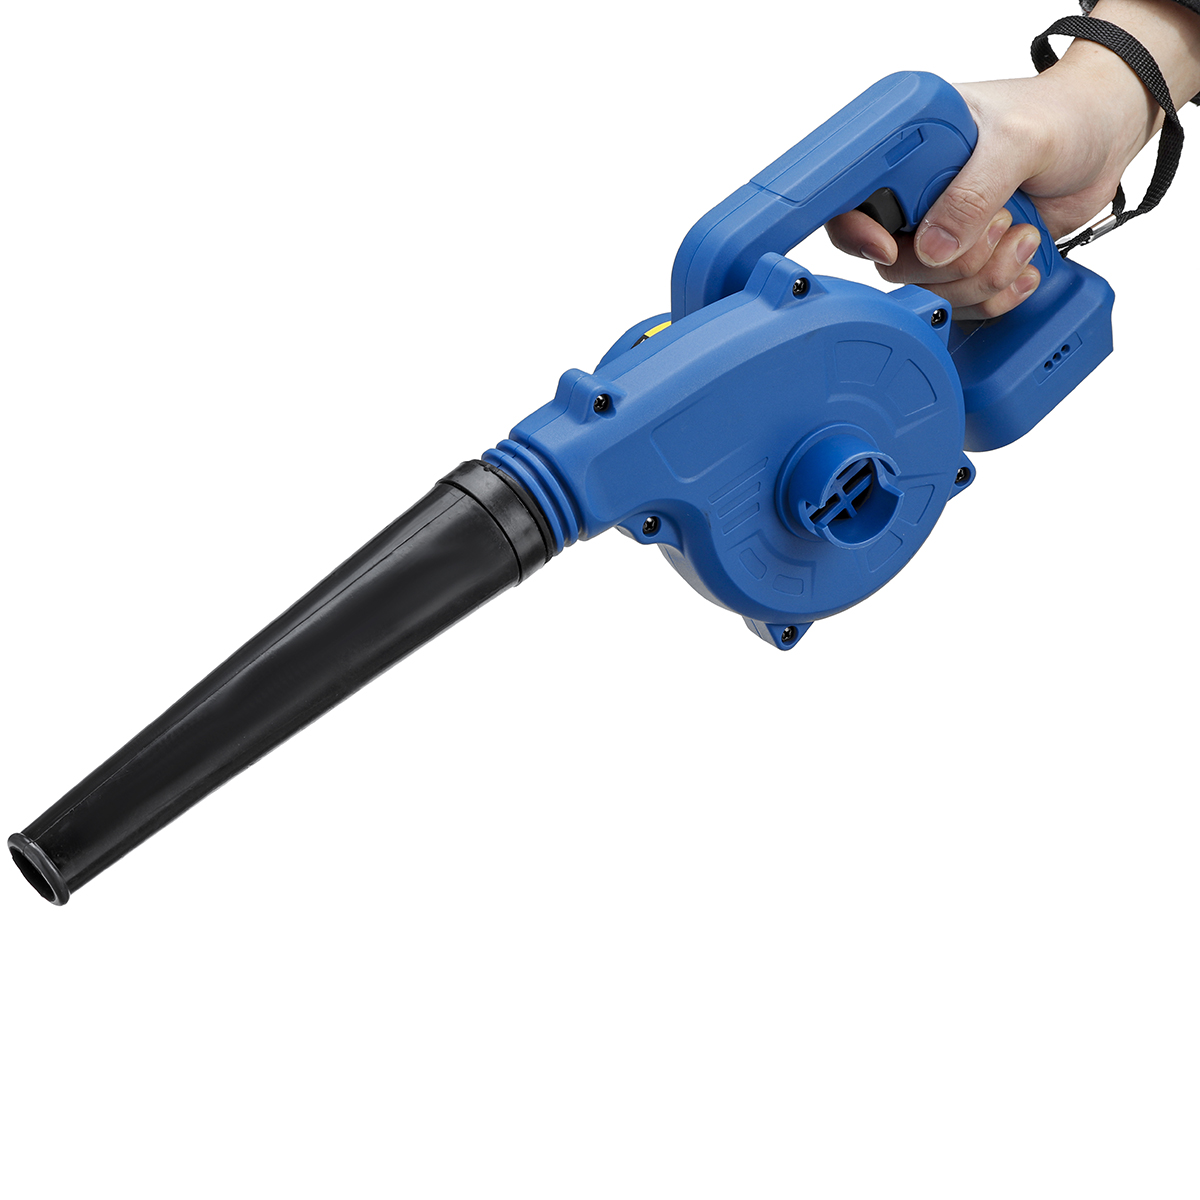 18V Cordless Electric Air Blower Vacuum Cleaner Suction Blower Tool For Makita 18V Li-ion Battery